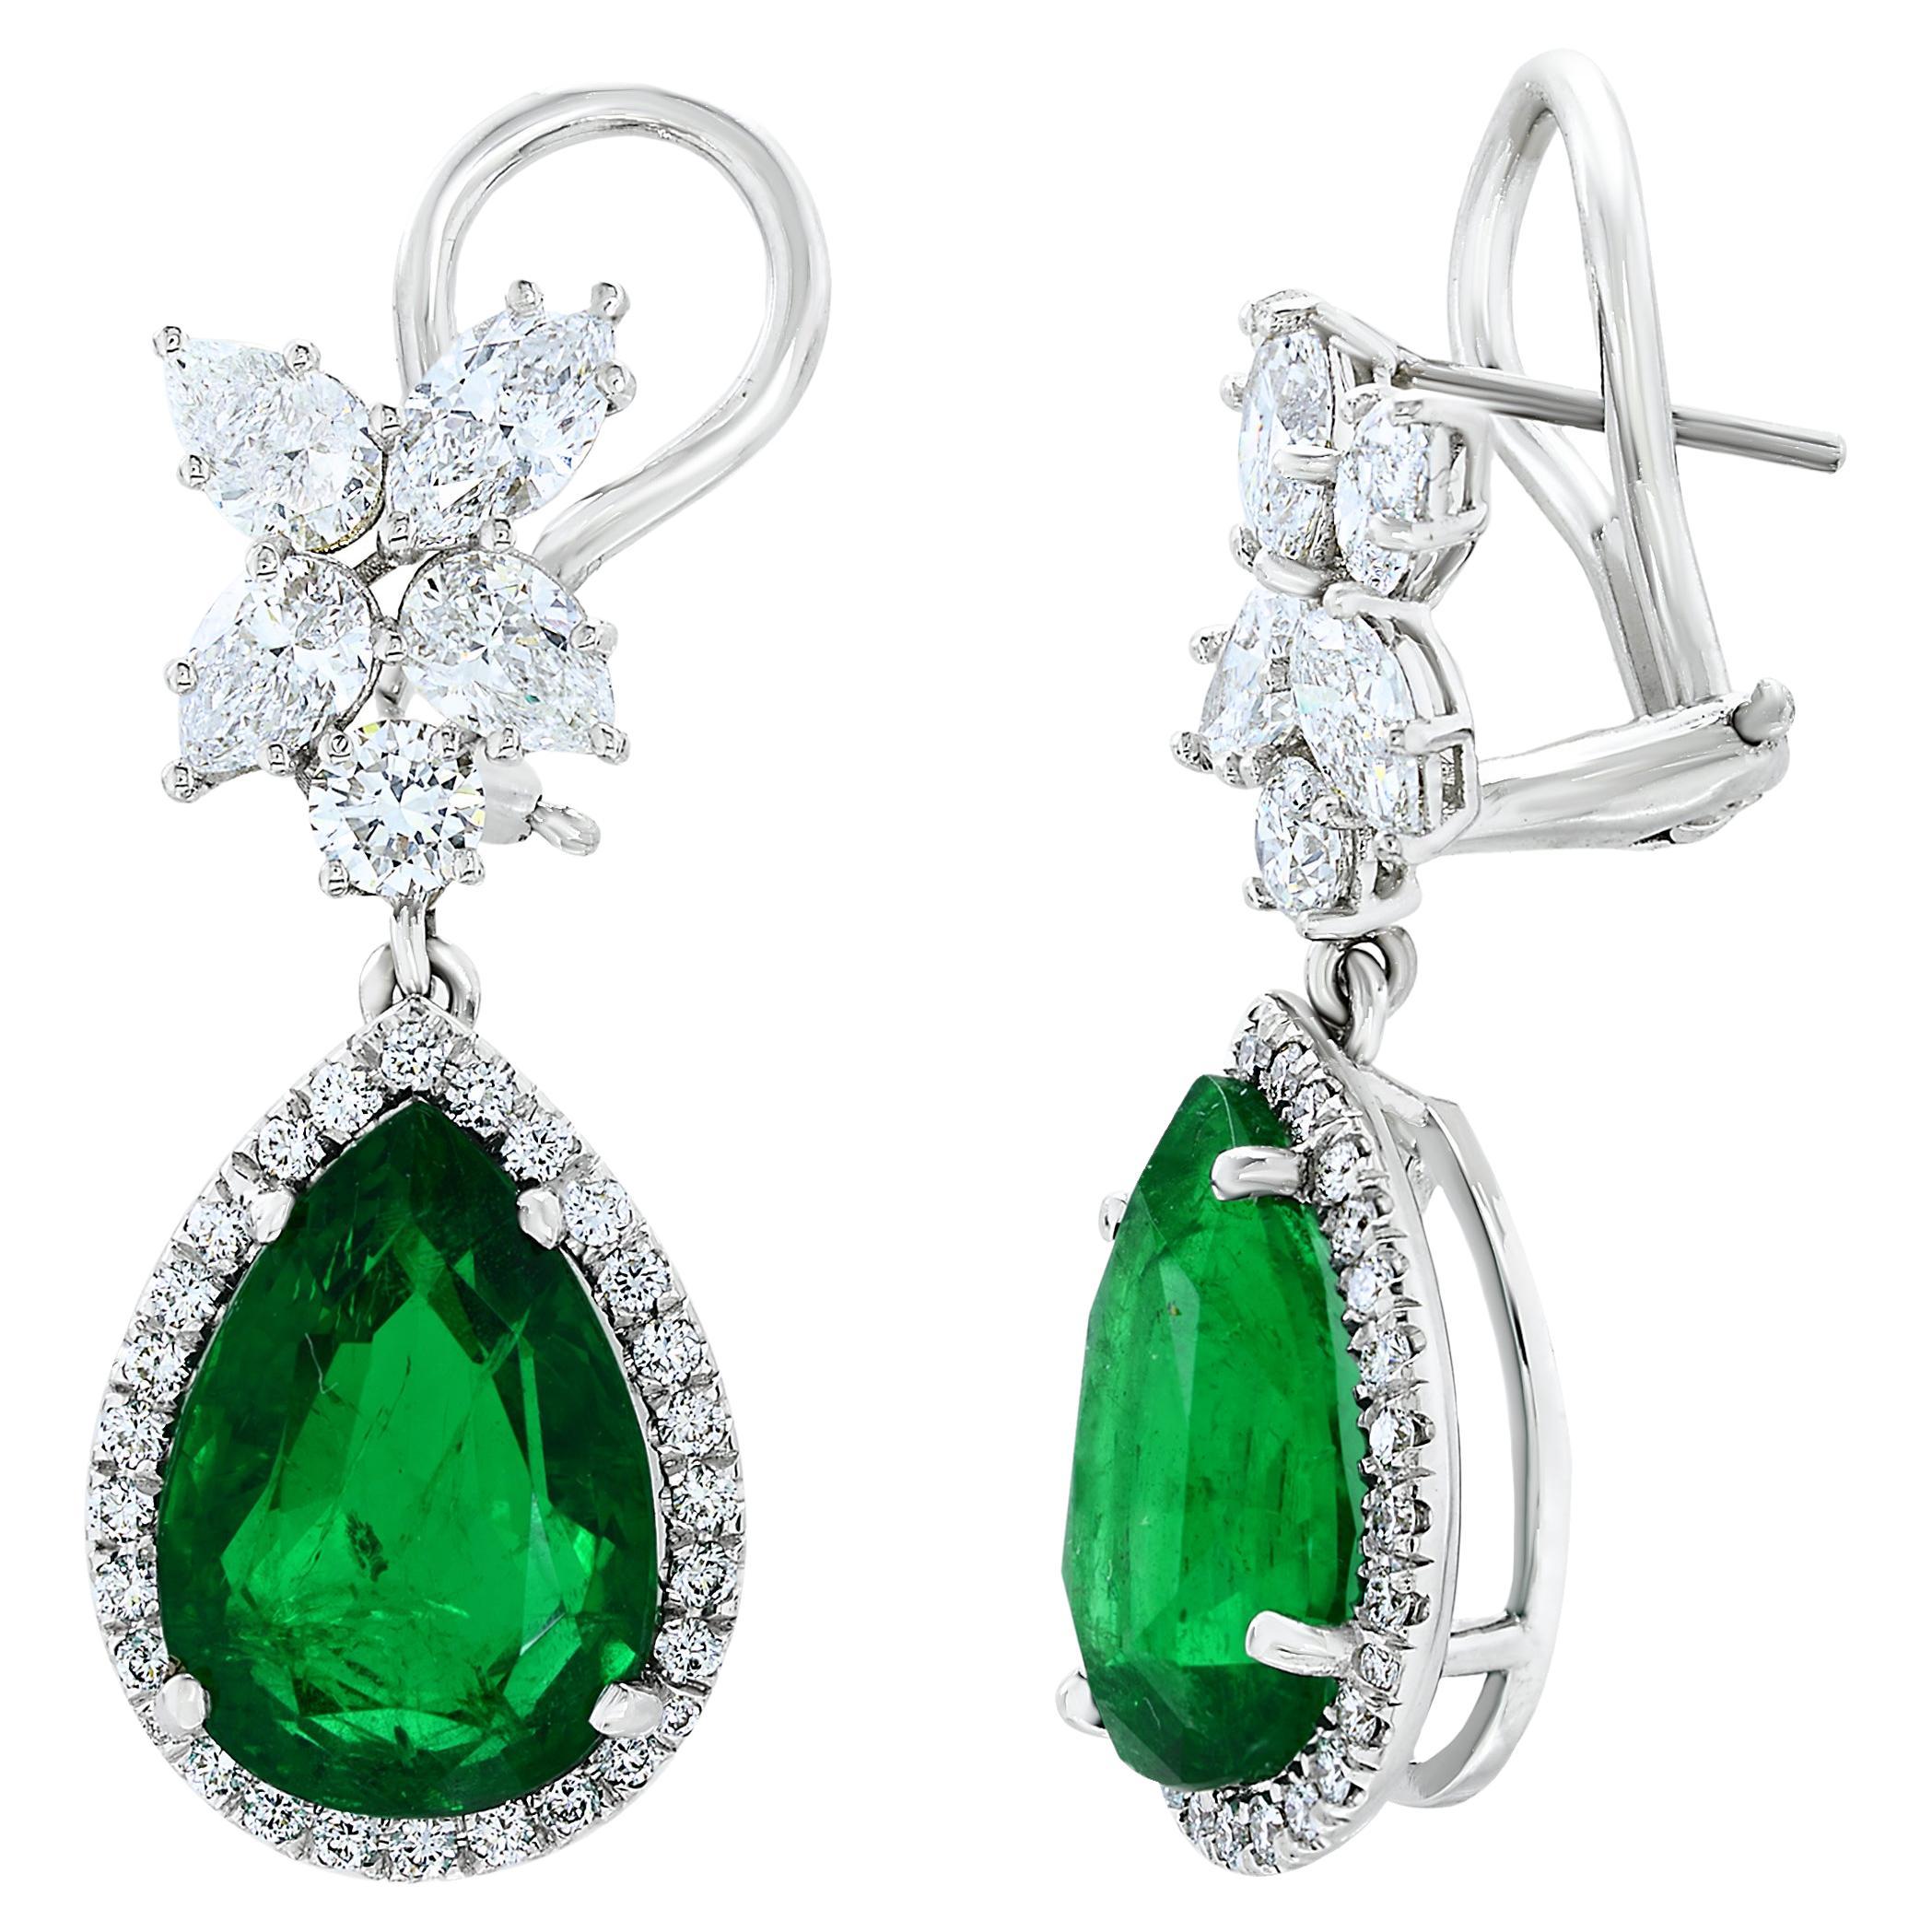 8.92 Carat of Pear Shape Emerald and Diamond Drop Earrings in 18K White Gold